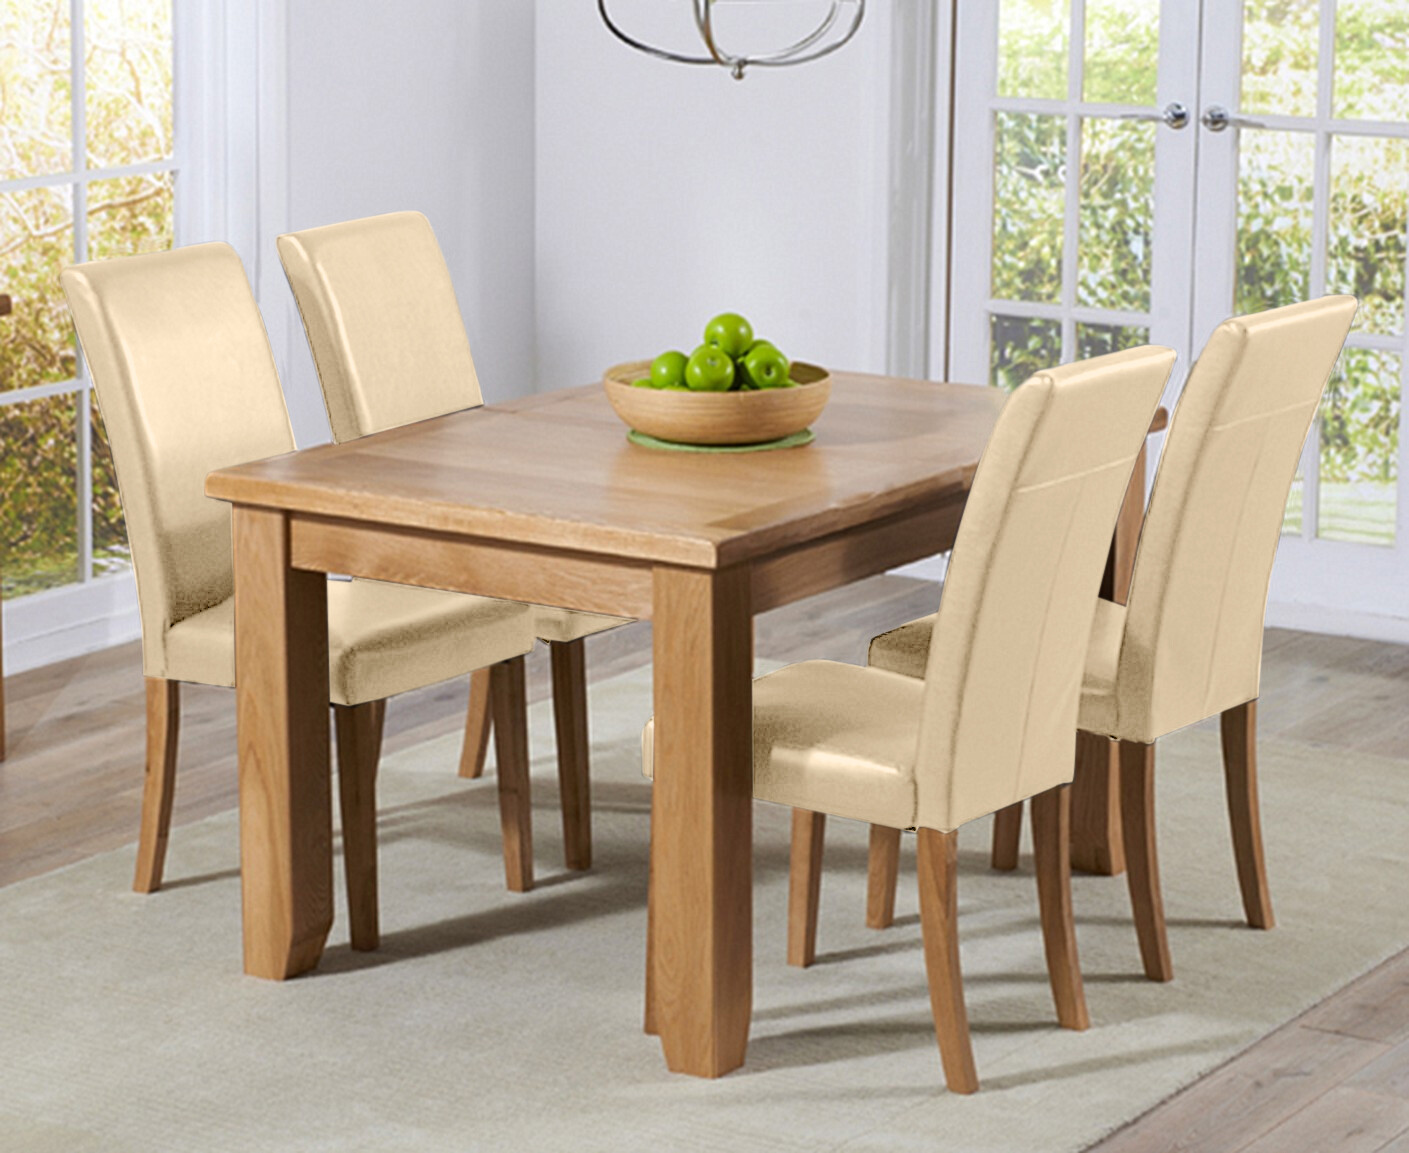 Extending Yateley 130cm Oak Dining Table With 6 Cream Olivia Chairs